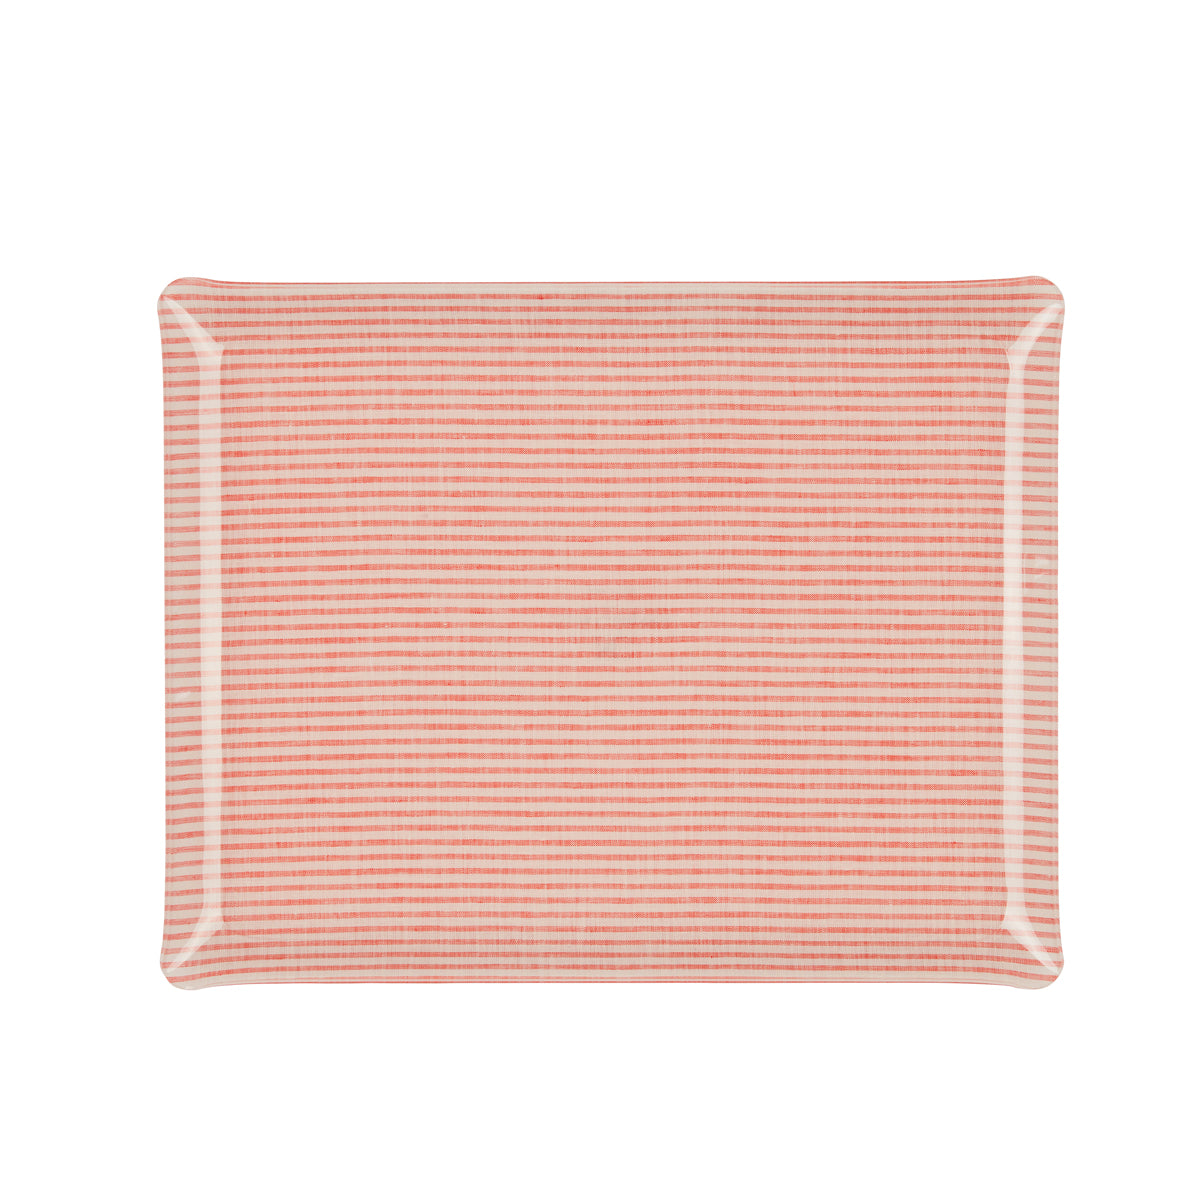 Nina Campbell Fabric Tray Large - Stripe Coral and White